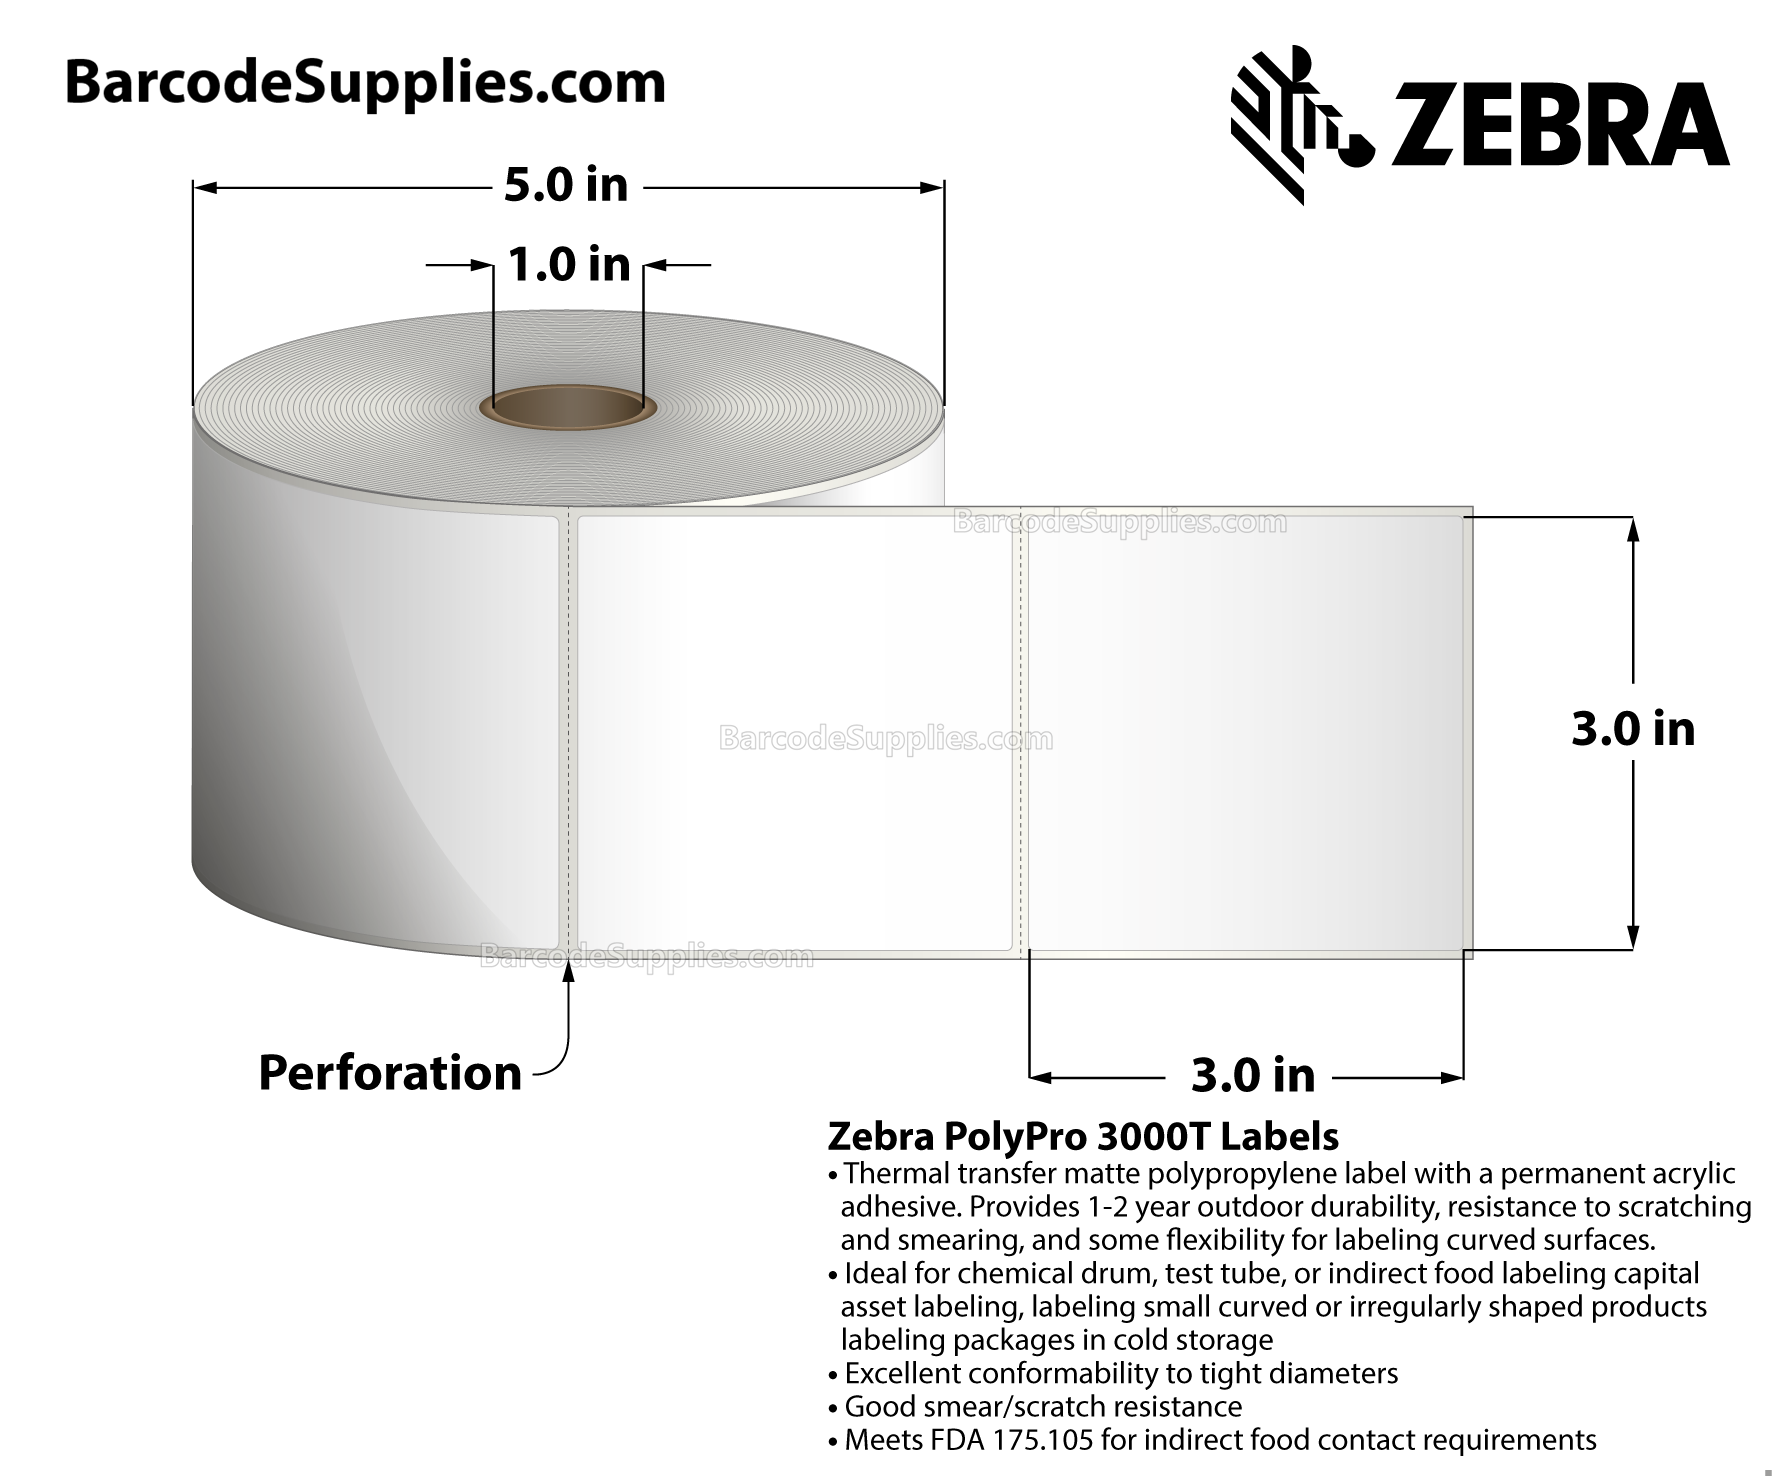 3 x 3 Thermal Transfer White PolyPro 3000T Labels With Permanent Adhesive - Perforated - 760 Labels Per Roll - Carton Of 8 Rolls - 6080 Labels Total - MPN: 18927